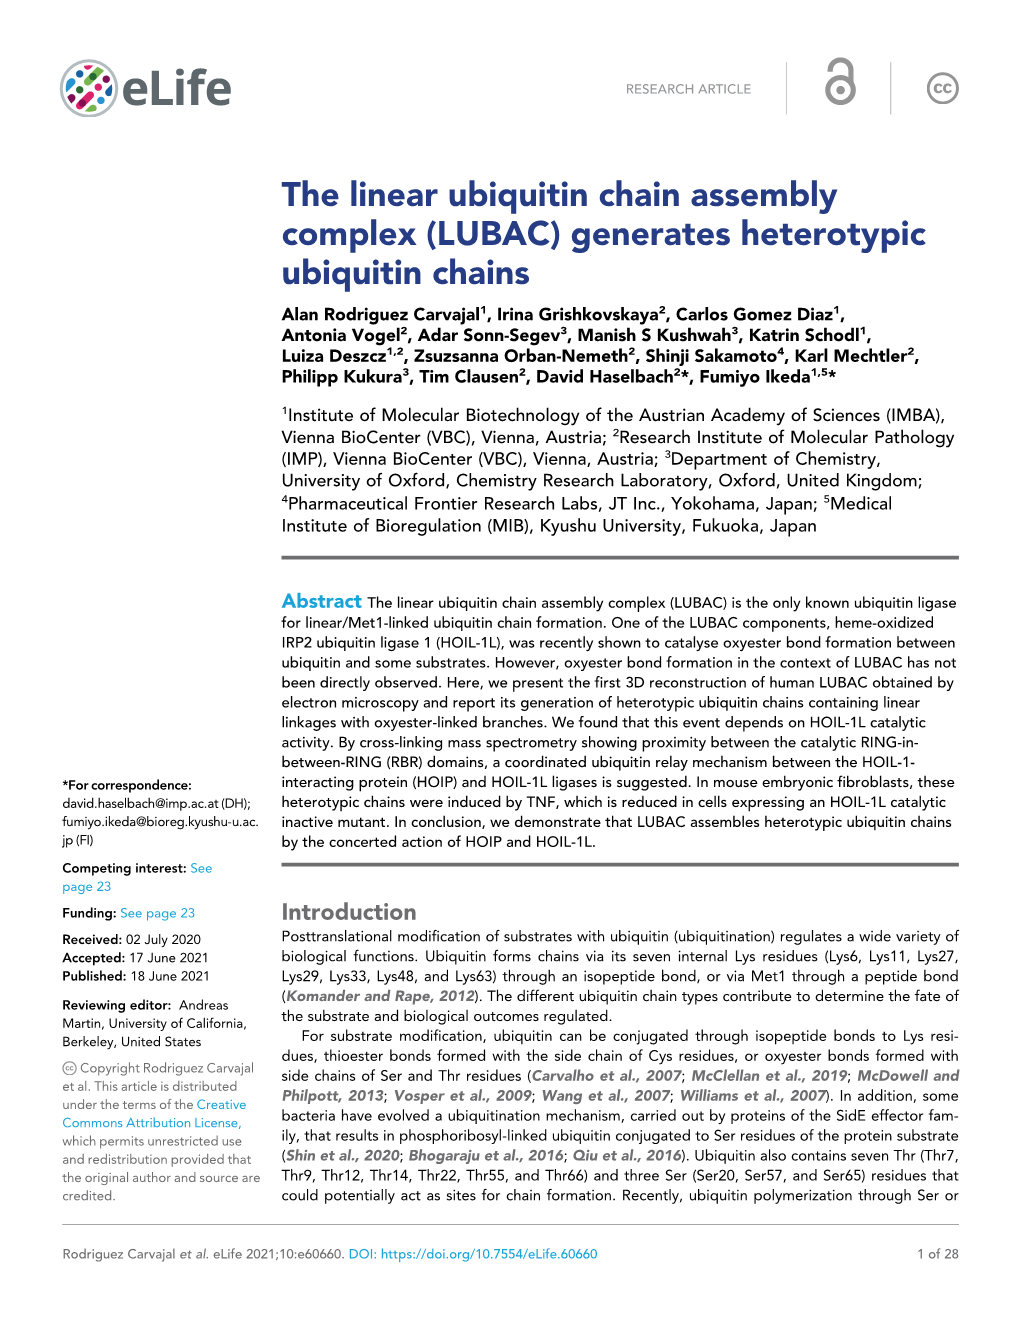 The Linear Ubiquitin Chain Assembly Complex